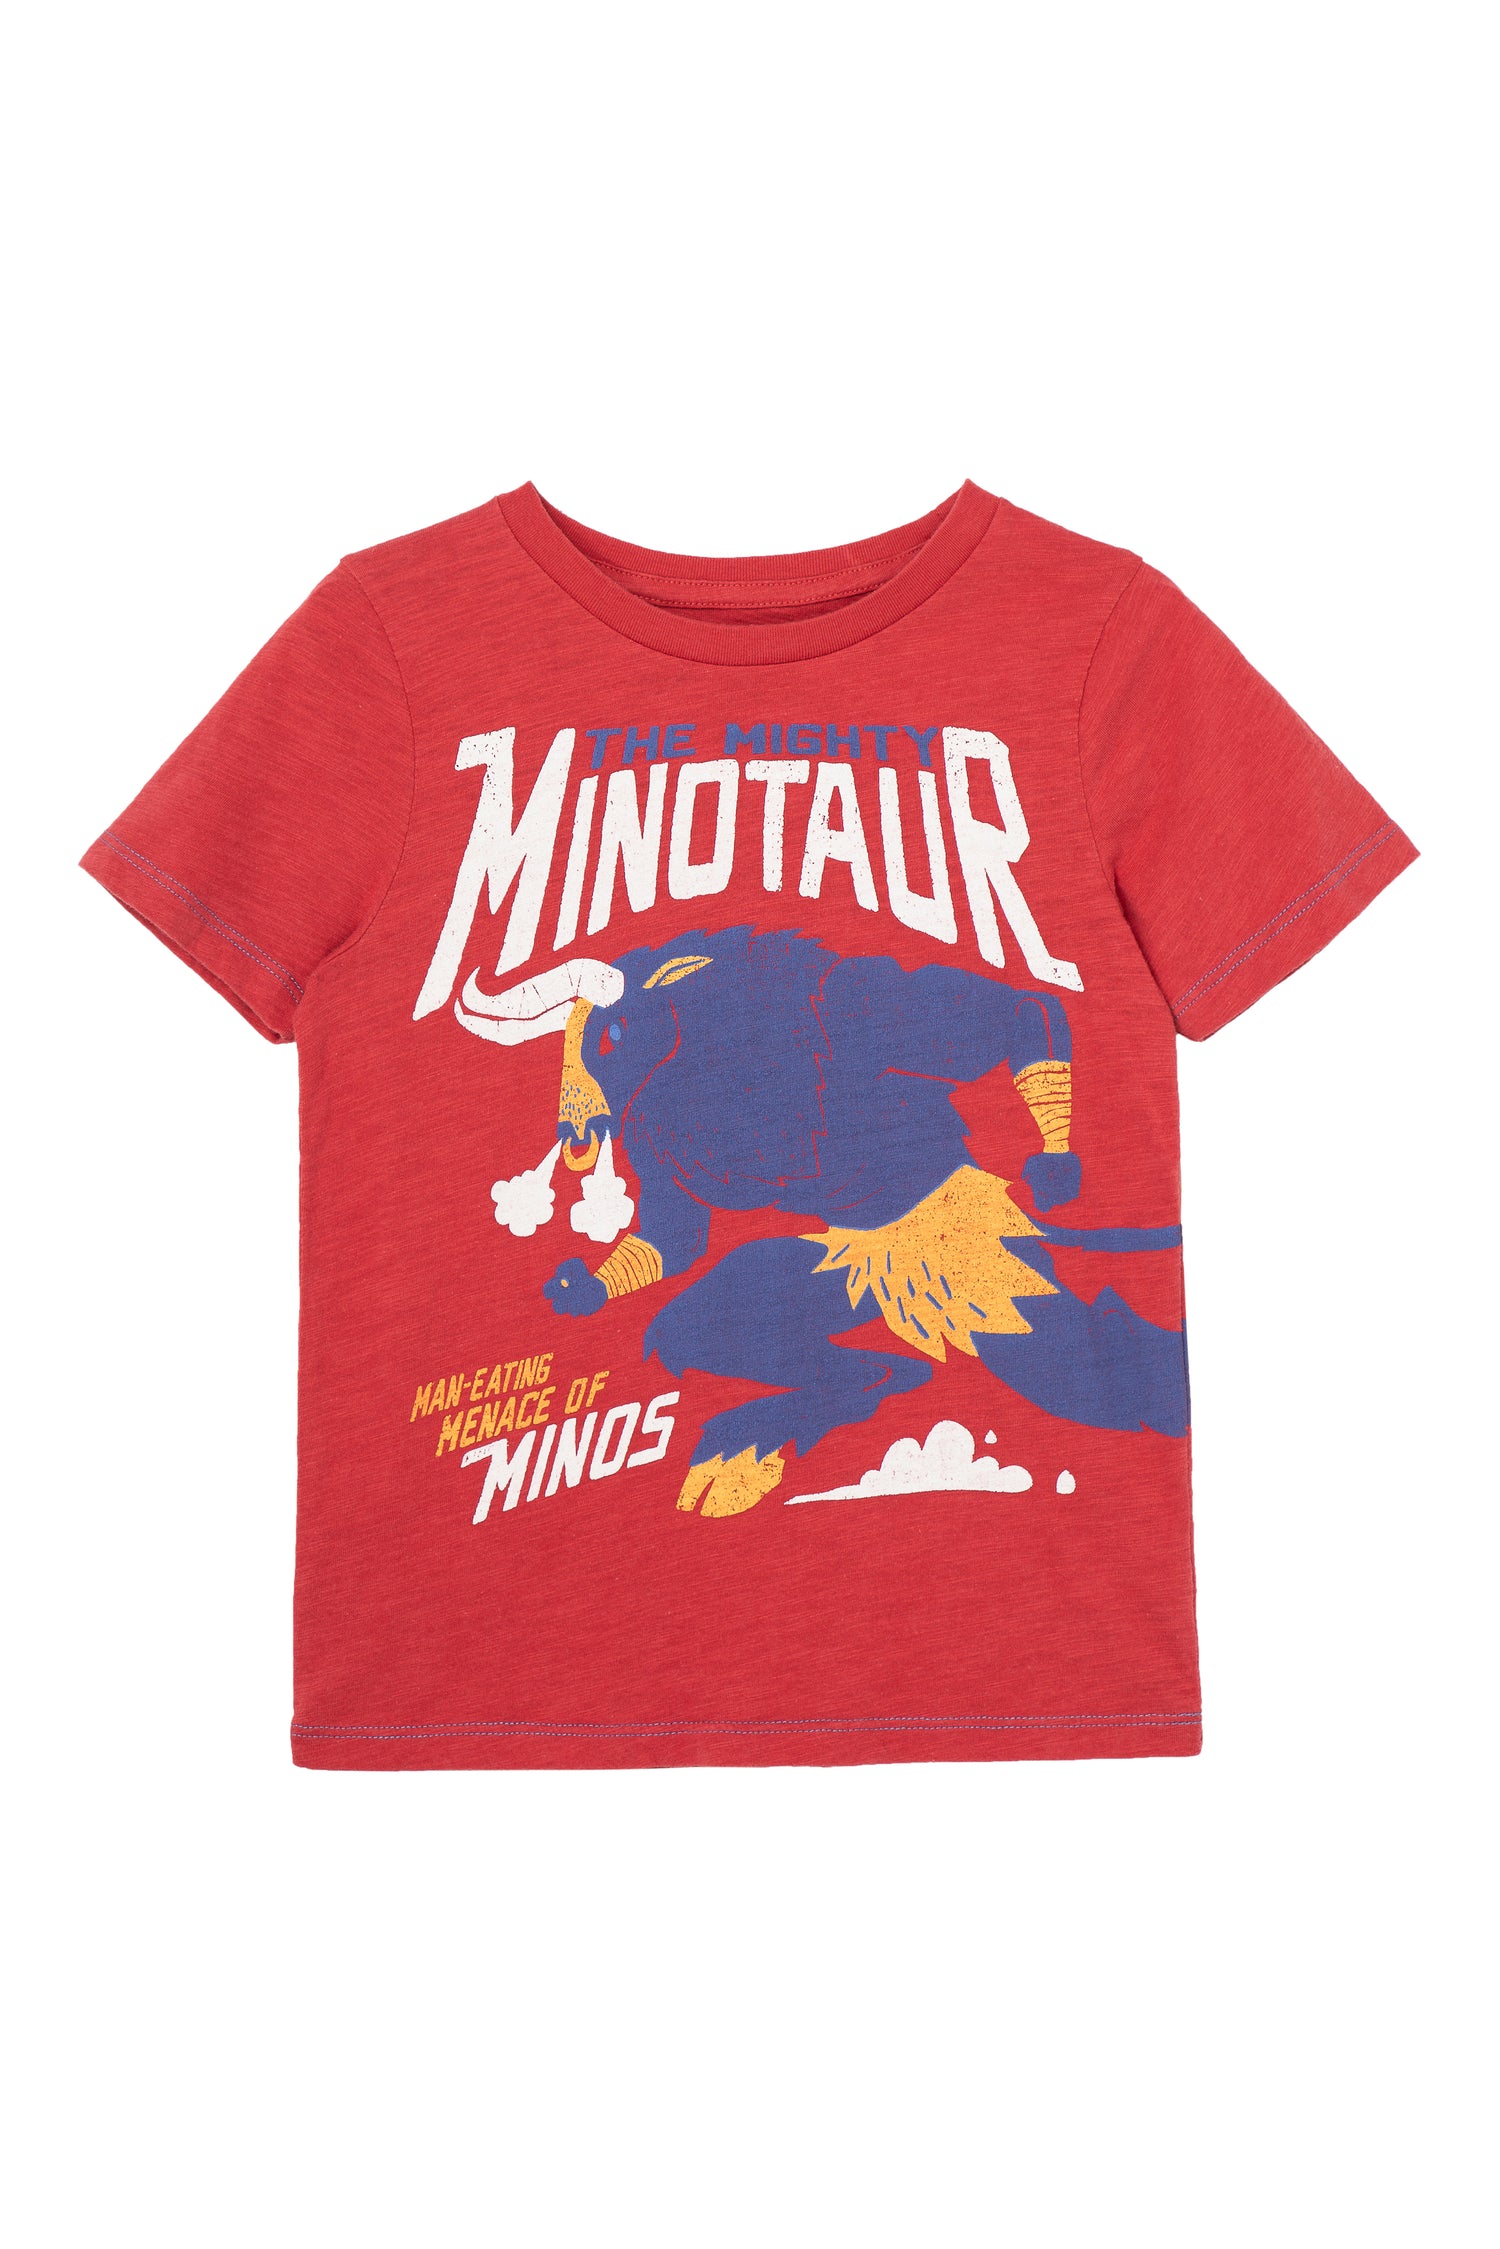 Red t-shirt with minotaur illustration and text 'the mighty minotaur'